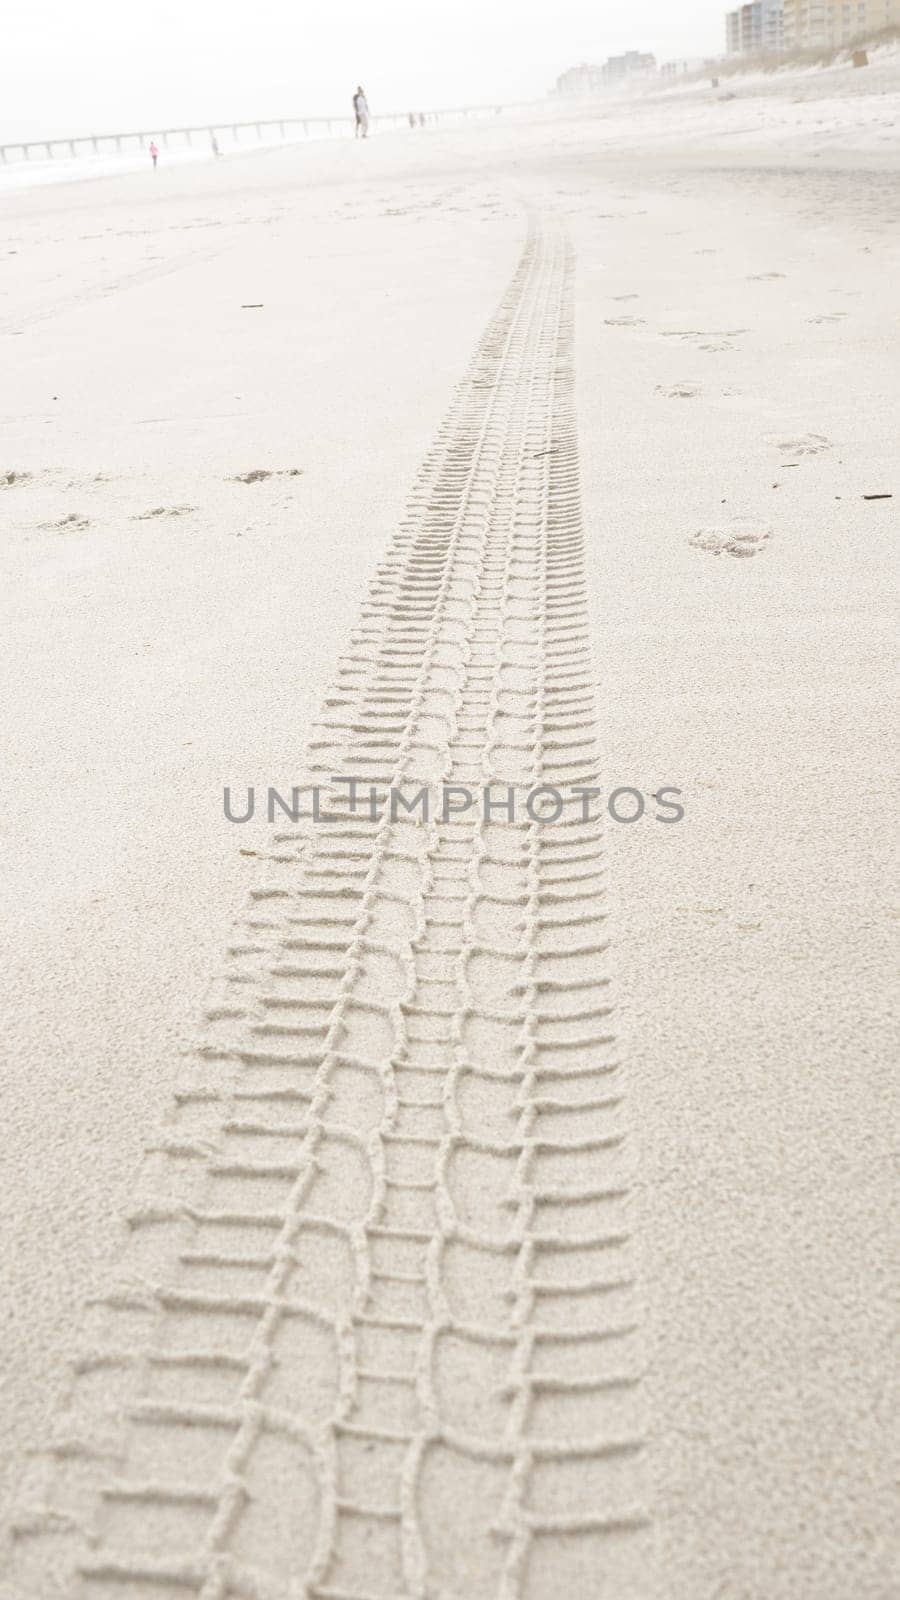 Detailed View of a Tire Track Left on a Sandy Beach Shoreline, Nature Transportation Adventure Scene by JuliaDorian